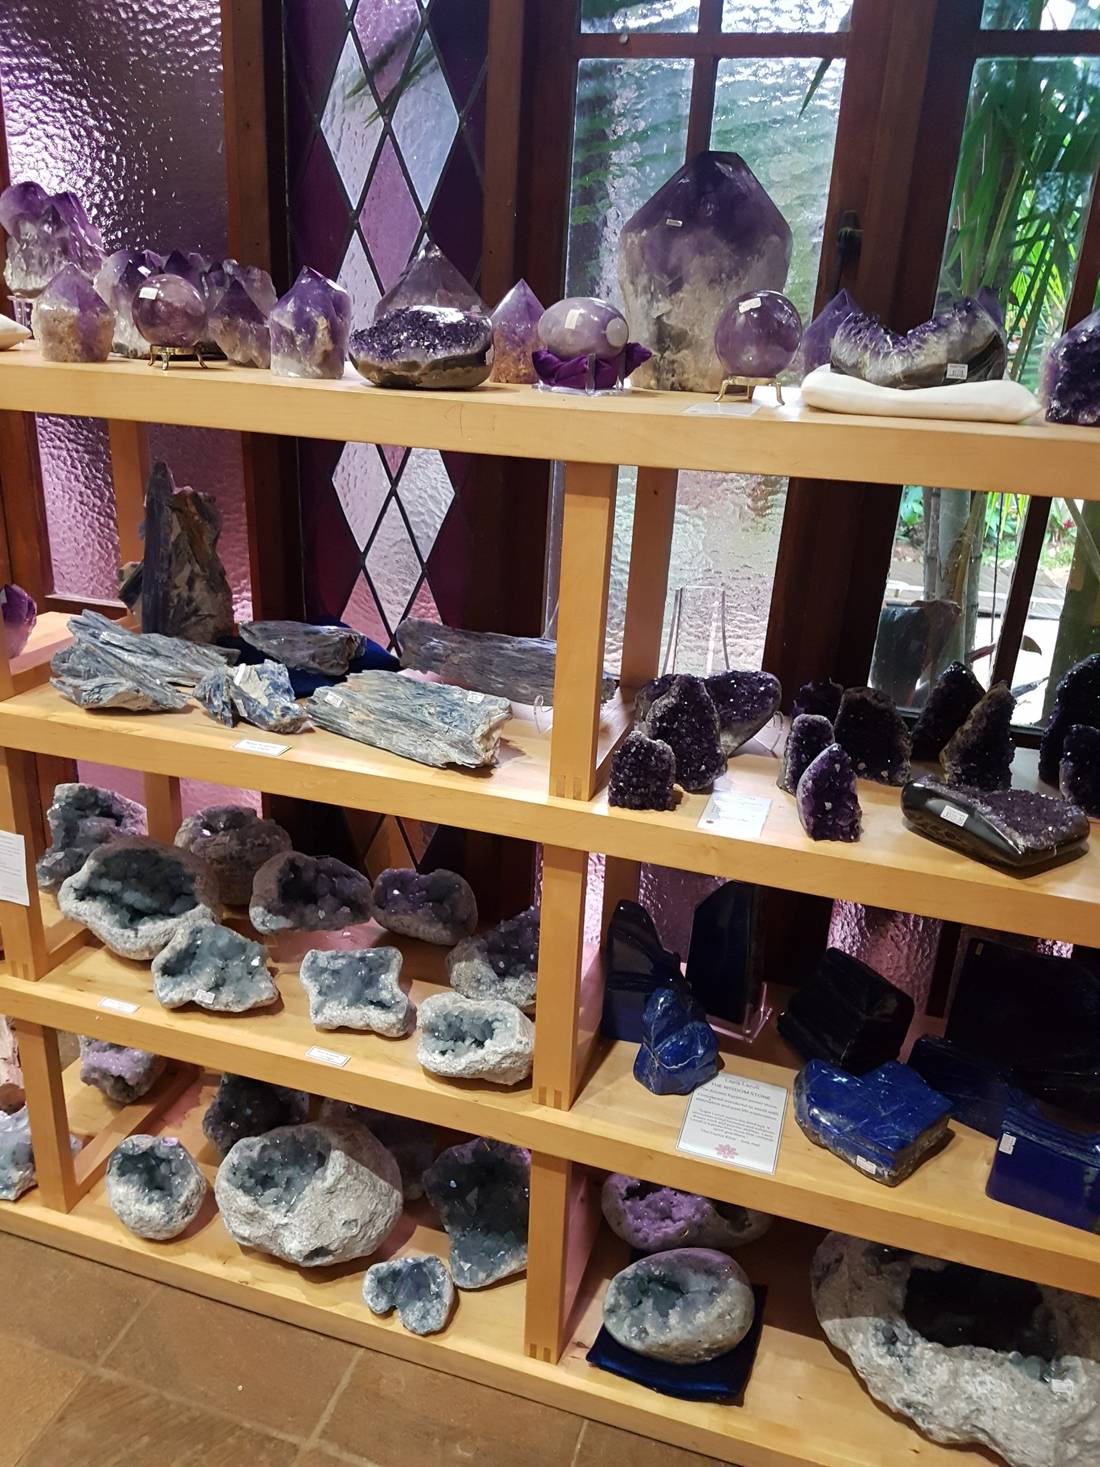 The shop was amazing and a bit overwhelming. I have a few small crystals at home but did not buy any here. Though it was tempting they were out of my price range.